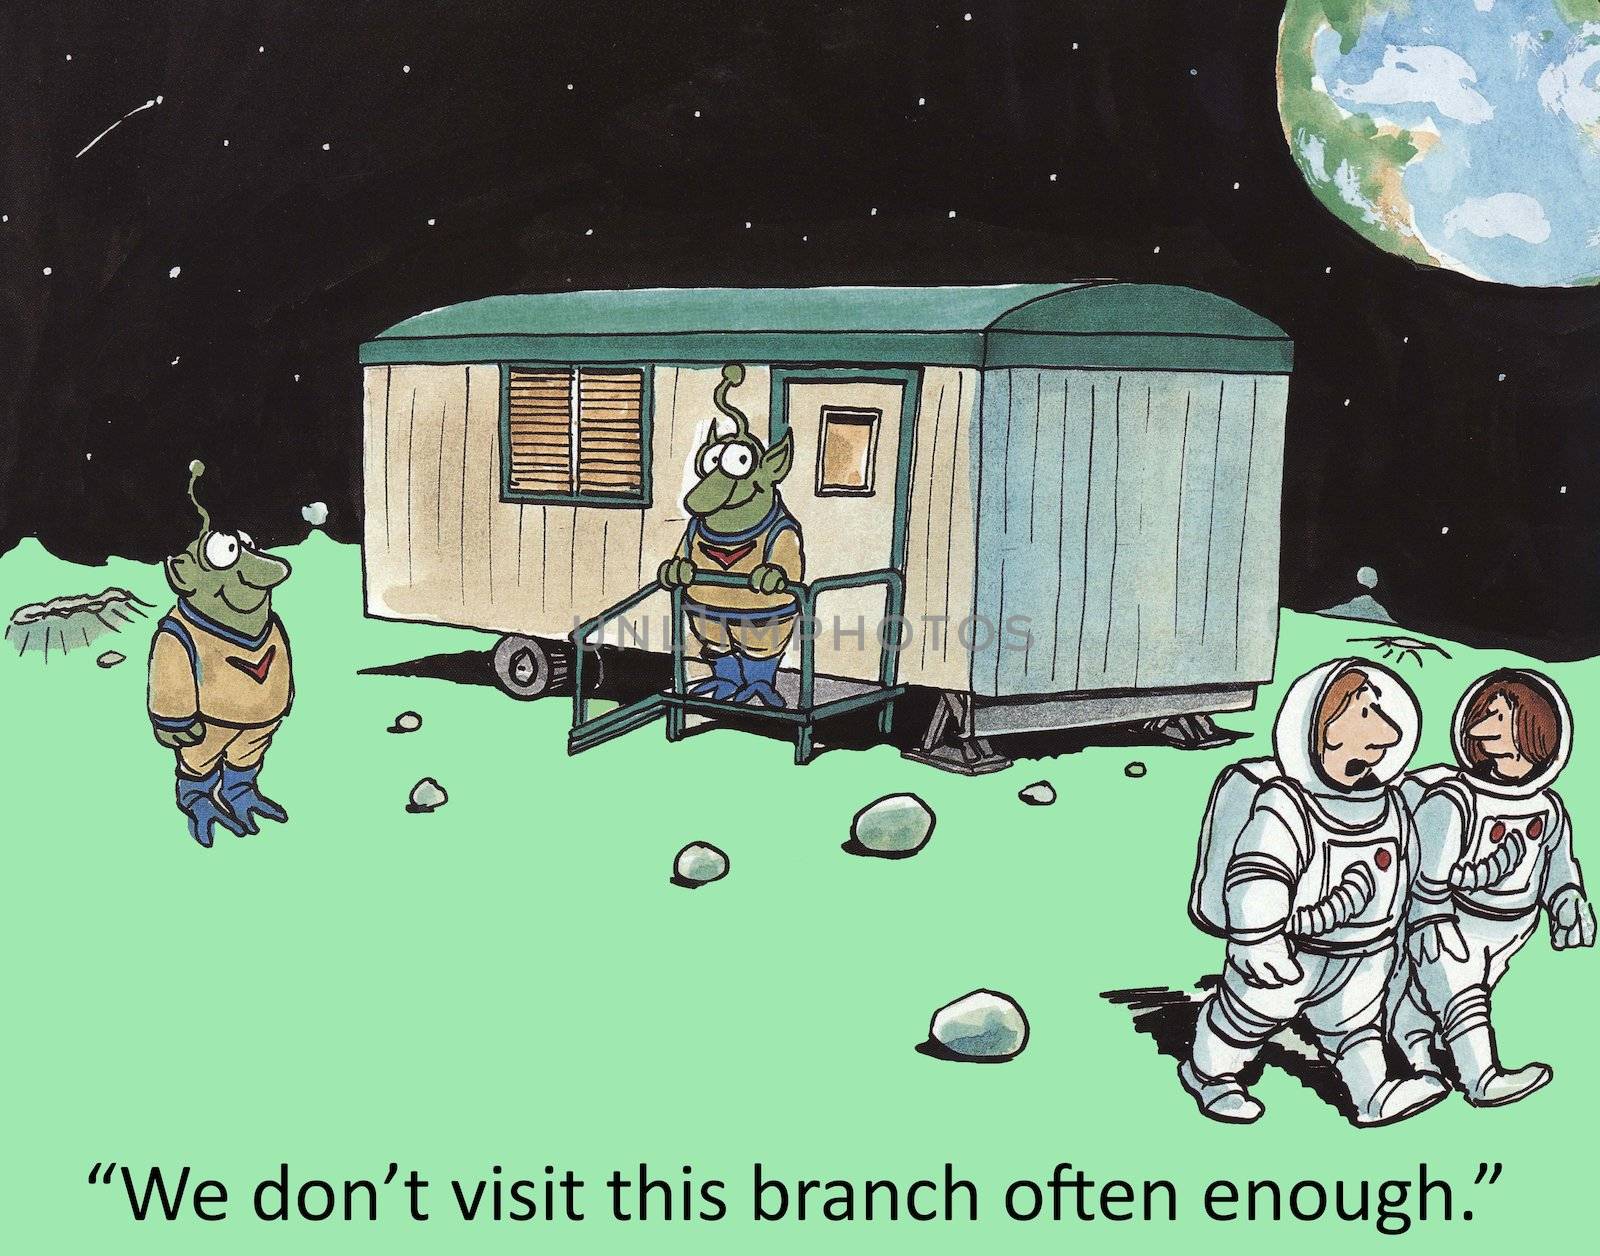 "We don't get visit this branch often enough."